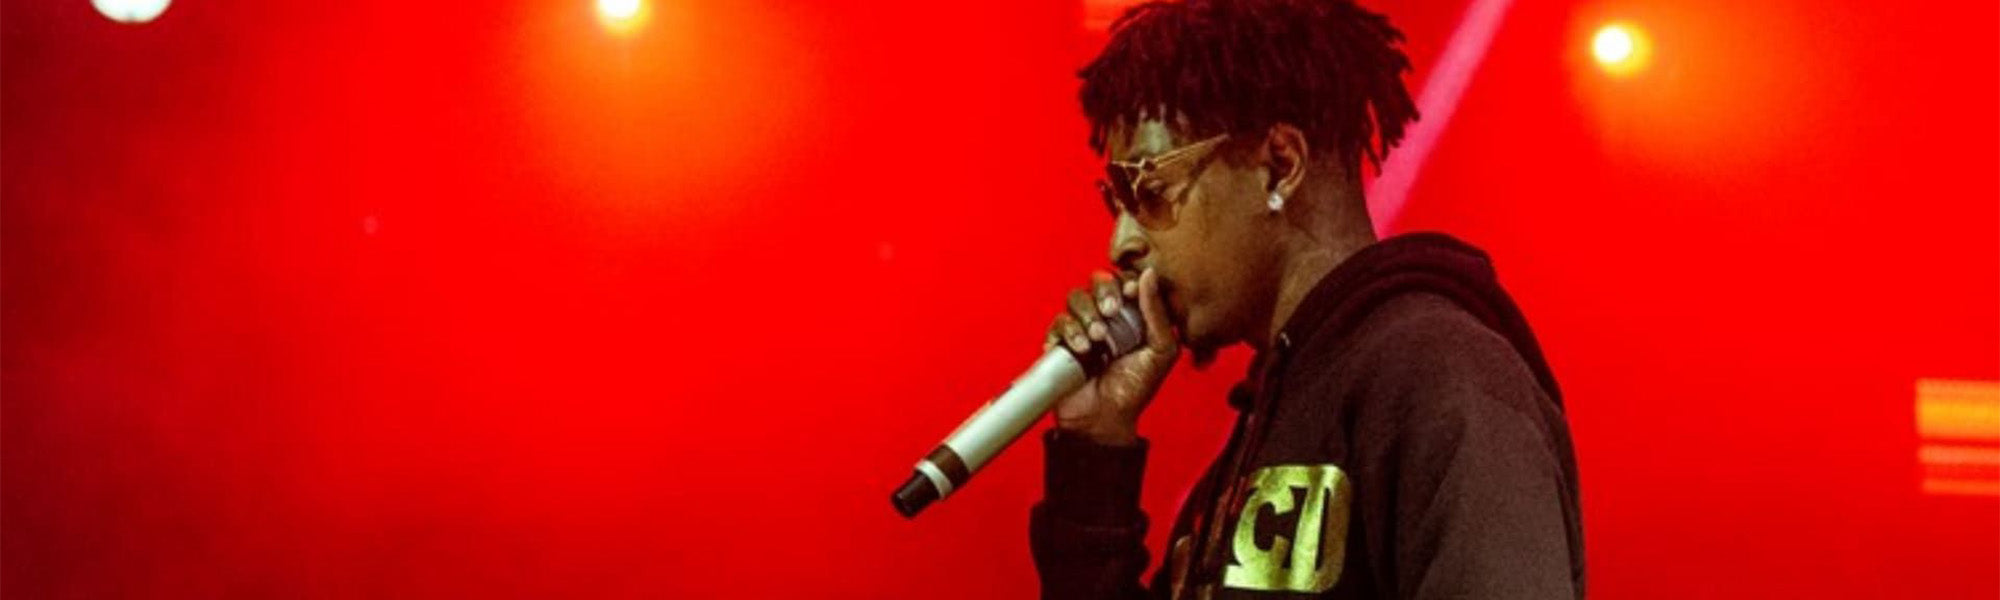 21 Savage Jewelry: 3 Reasons Why He Stopped Buying Jewelry